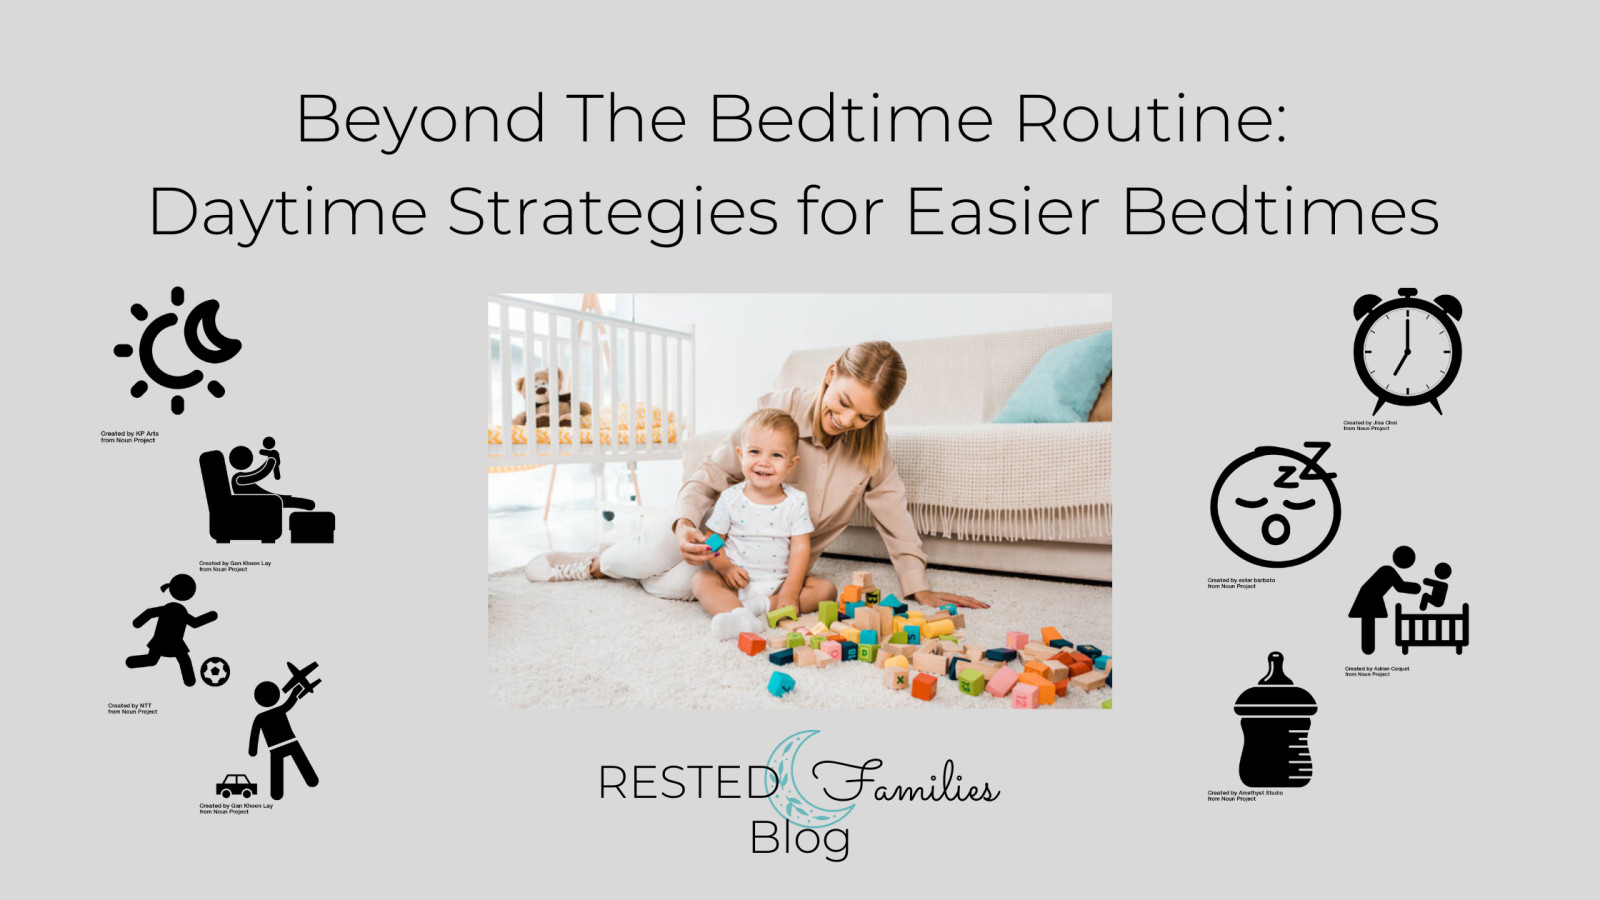 Beyond the Bedtime Routine: Daytime Strategies for Easier Bedtimes